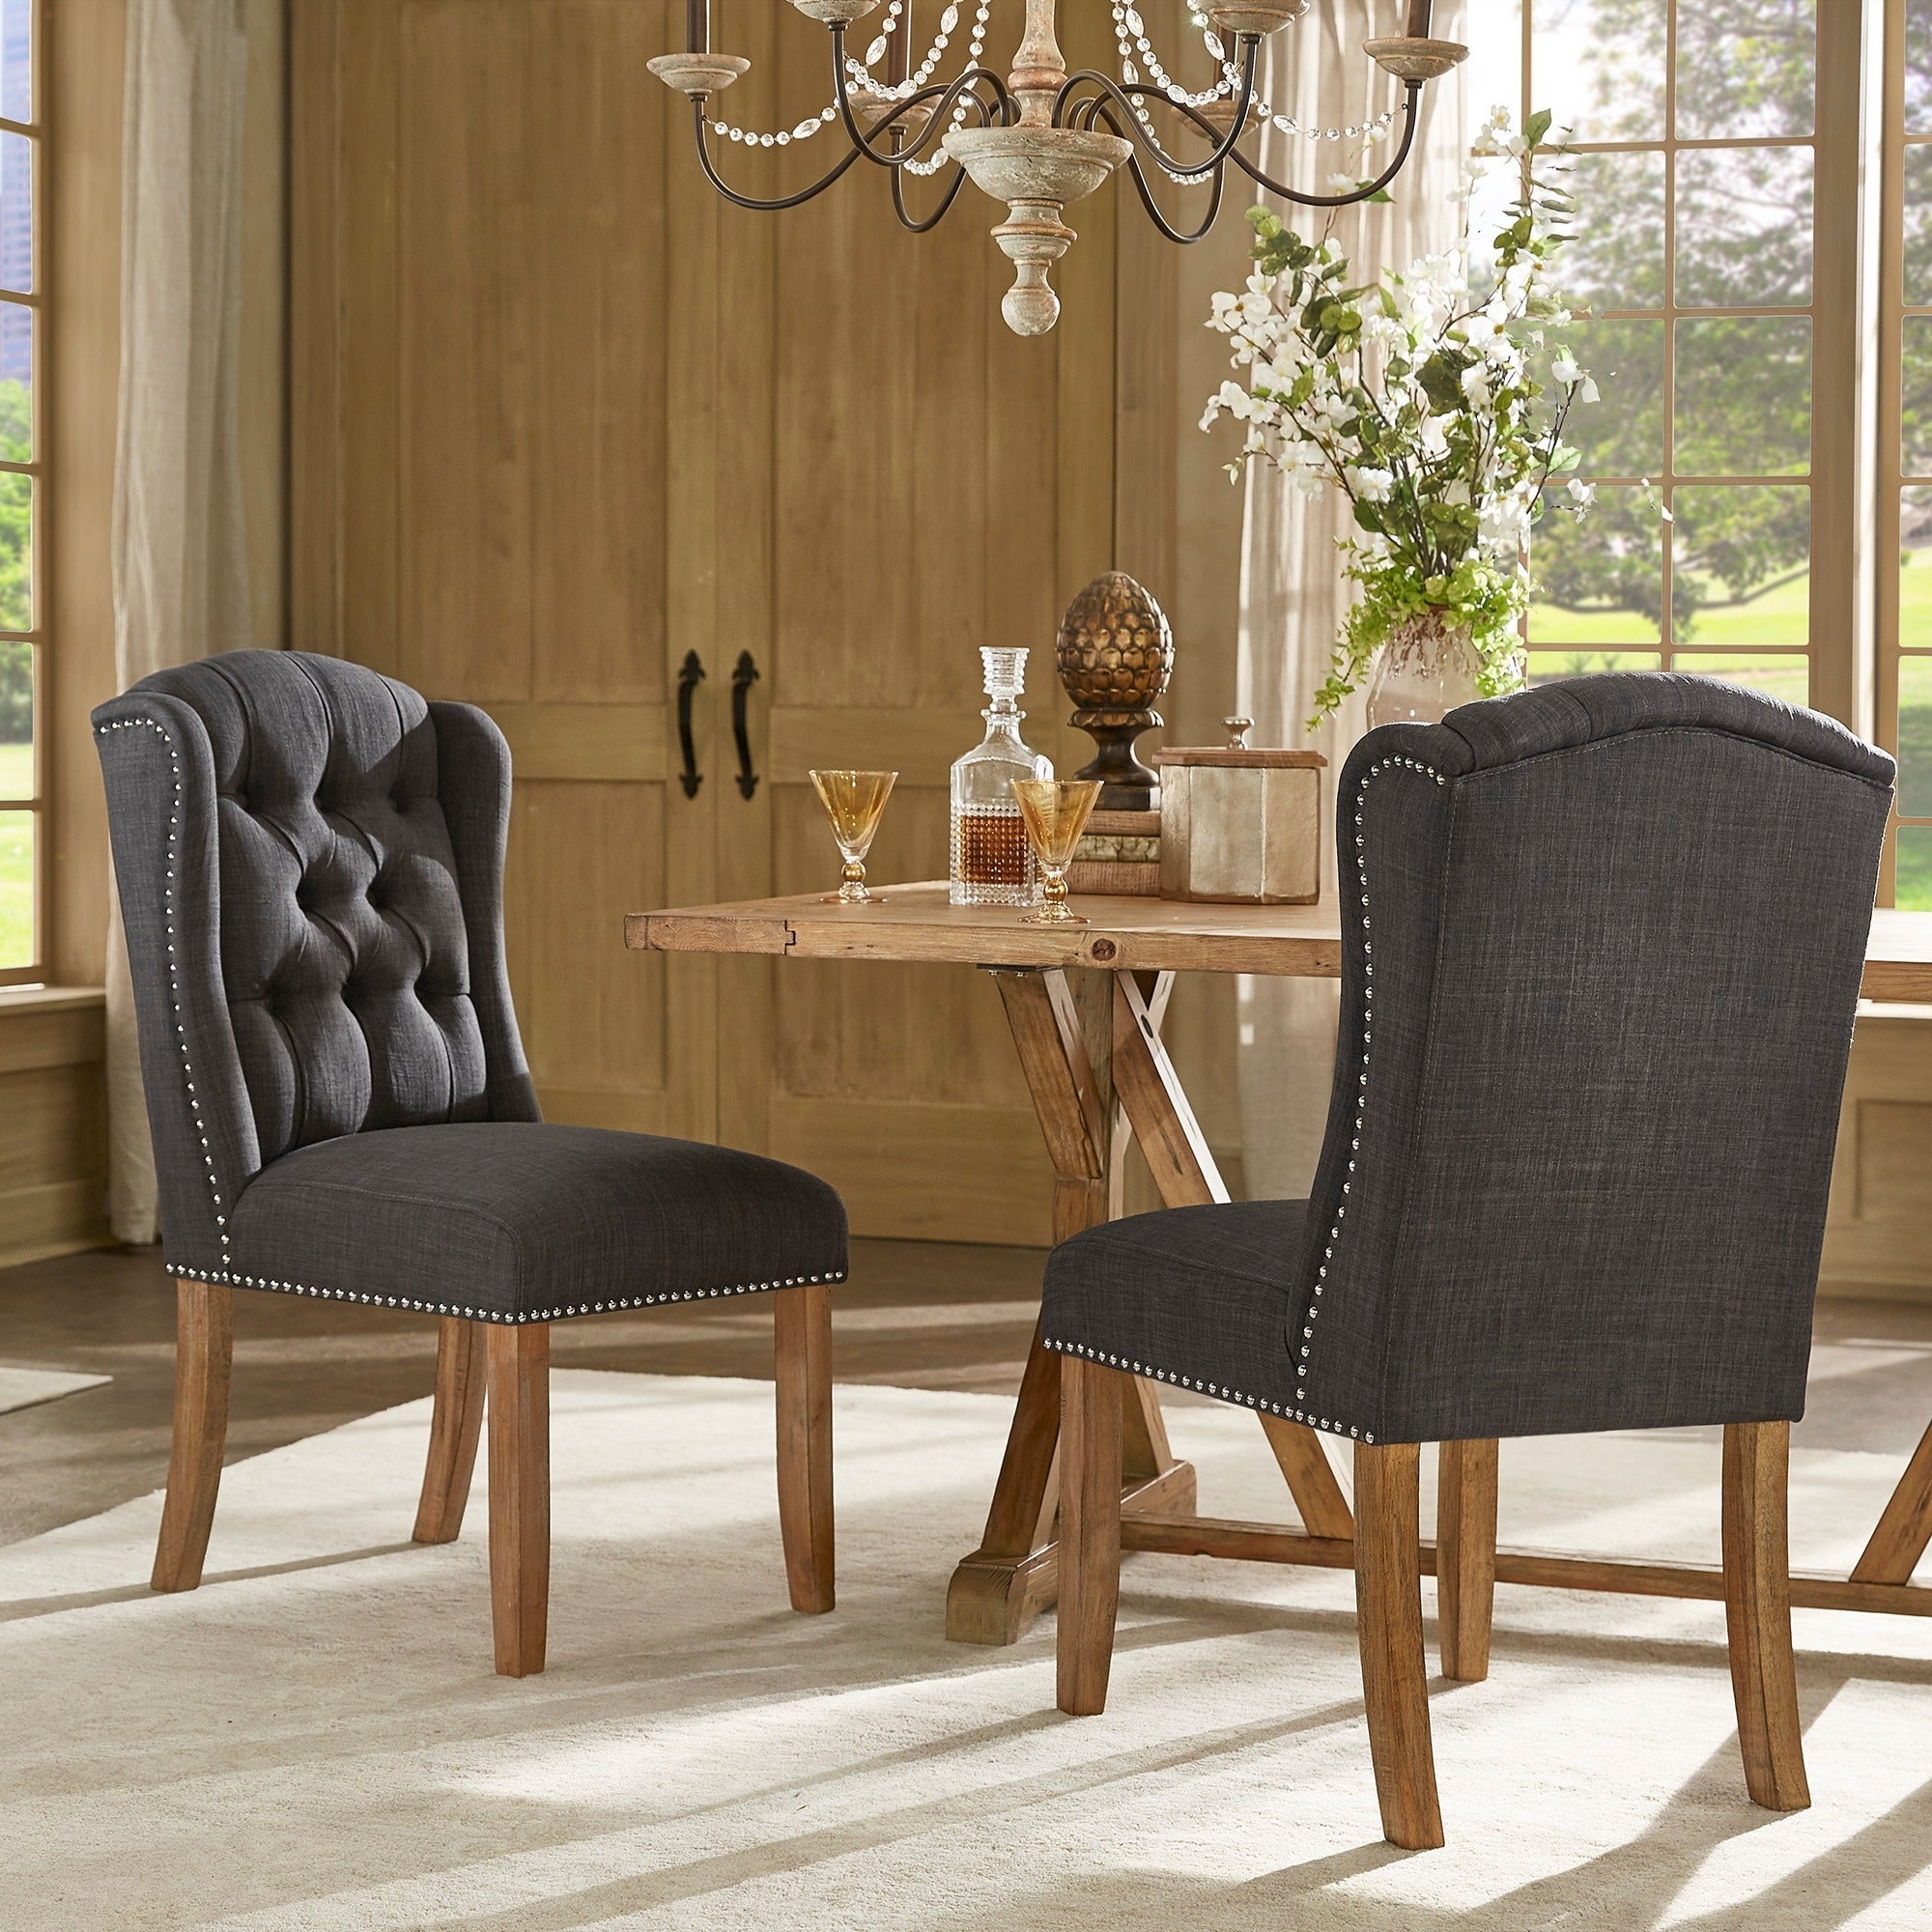 Tufted Wingback Dining Chairs with Nailhead Trim (Set of 2)